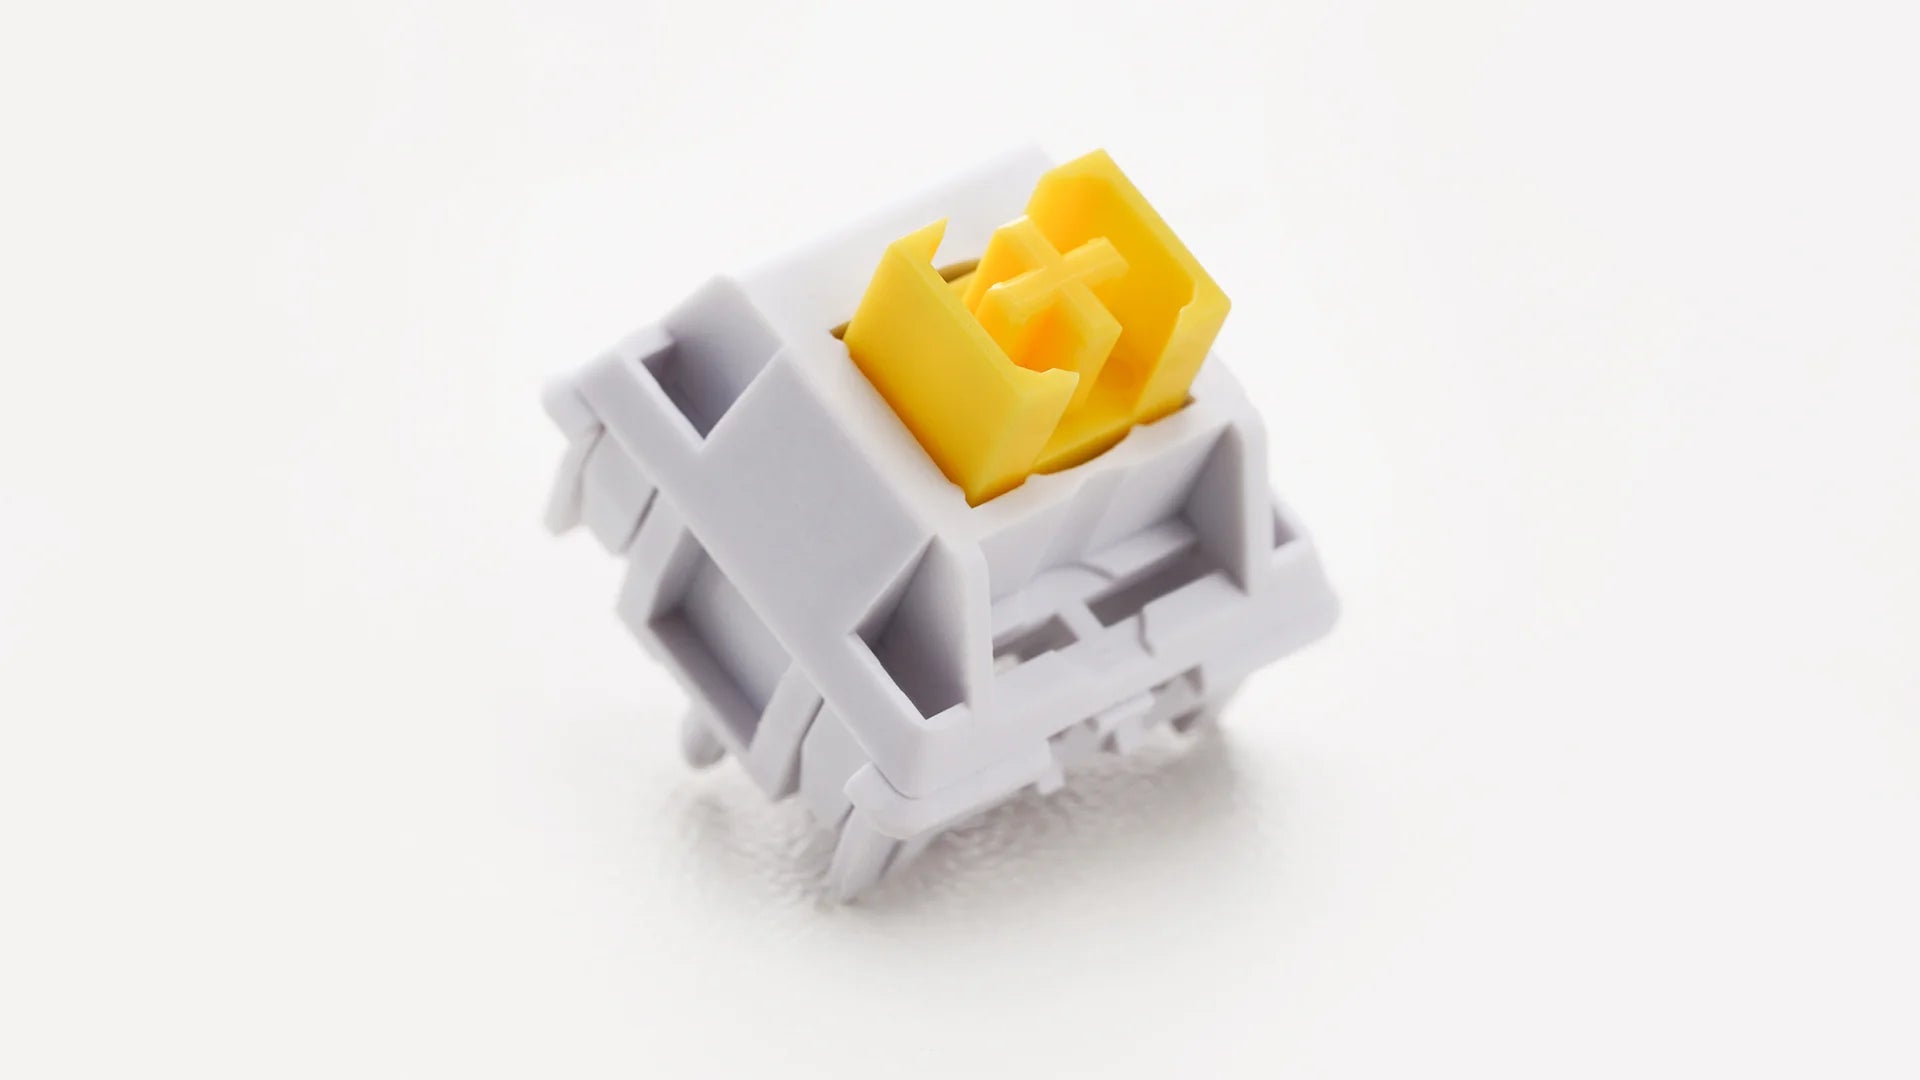 Wuque WS Yellow Linear Switches - KeebsForAll